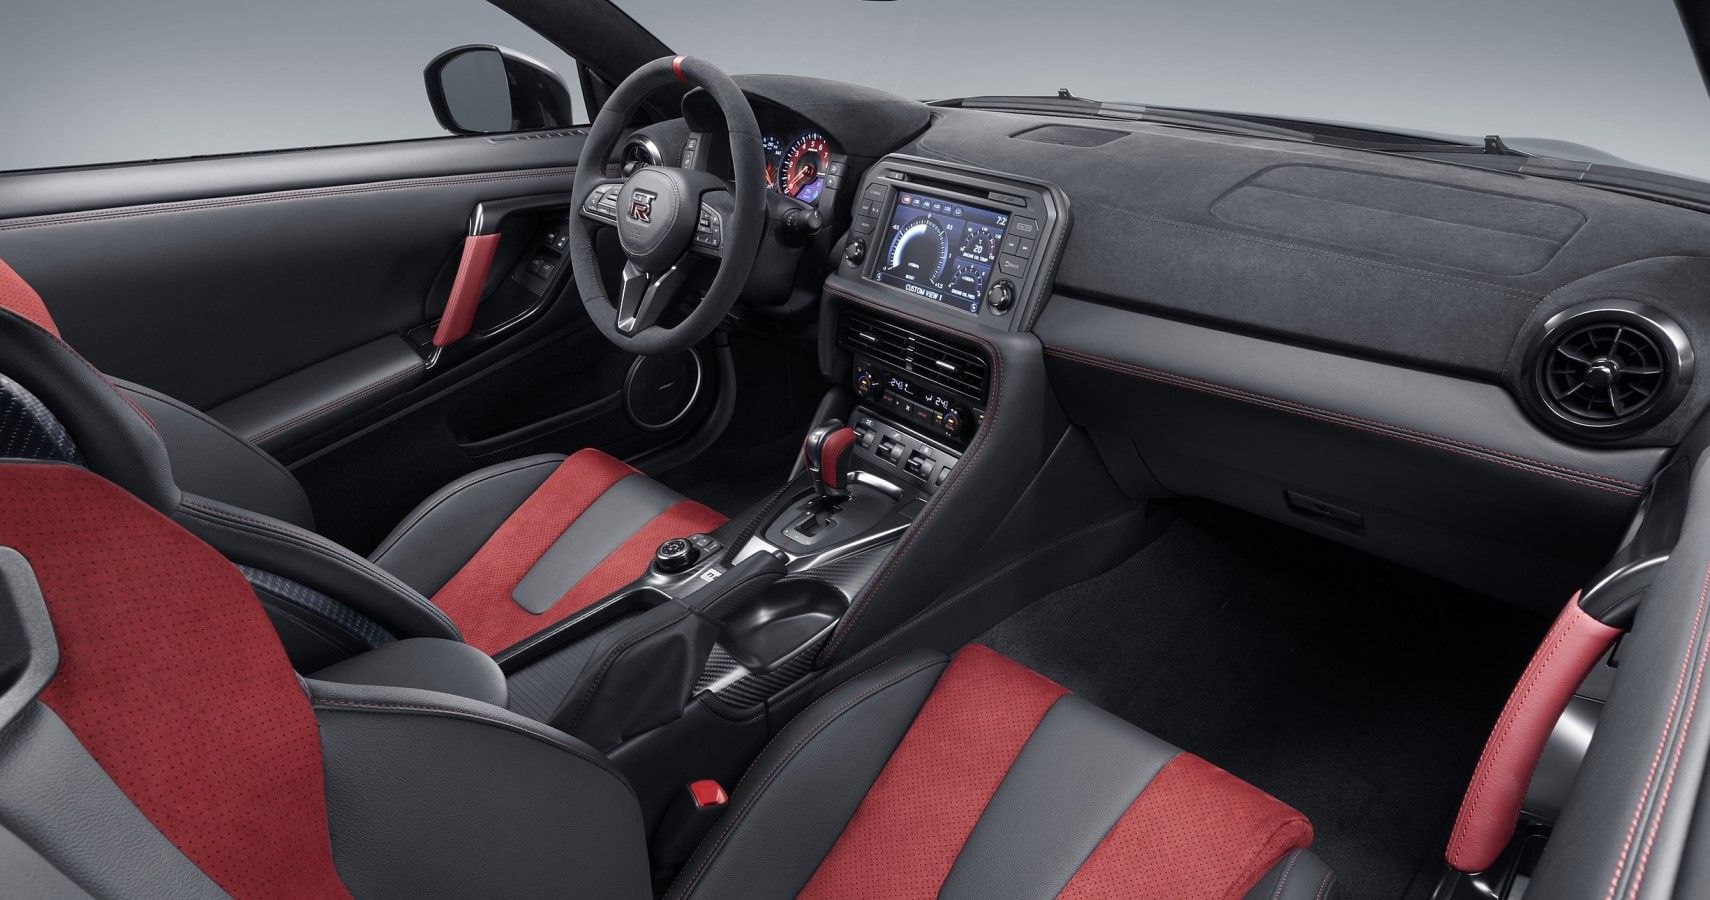 2022 Nissan GT-R interior will take a completely different approach